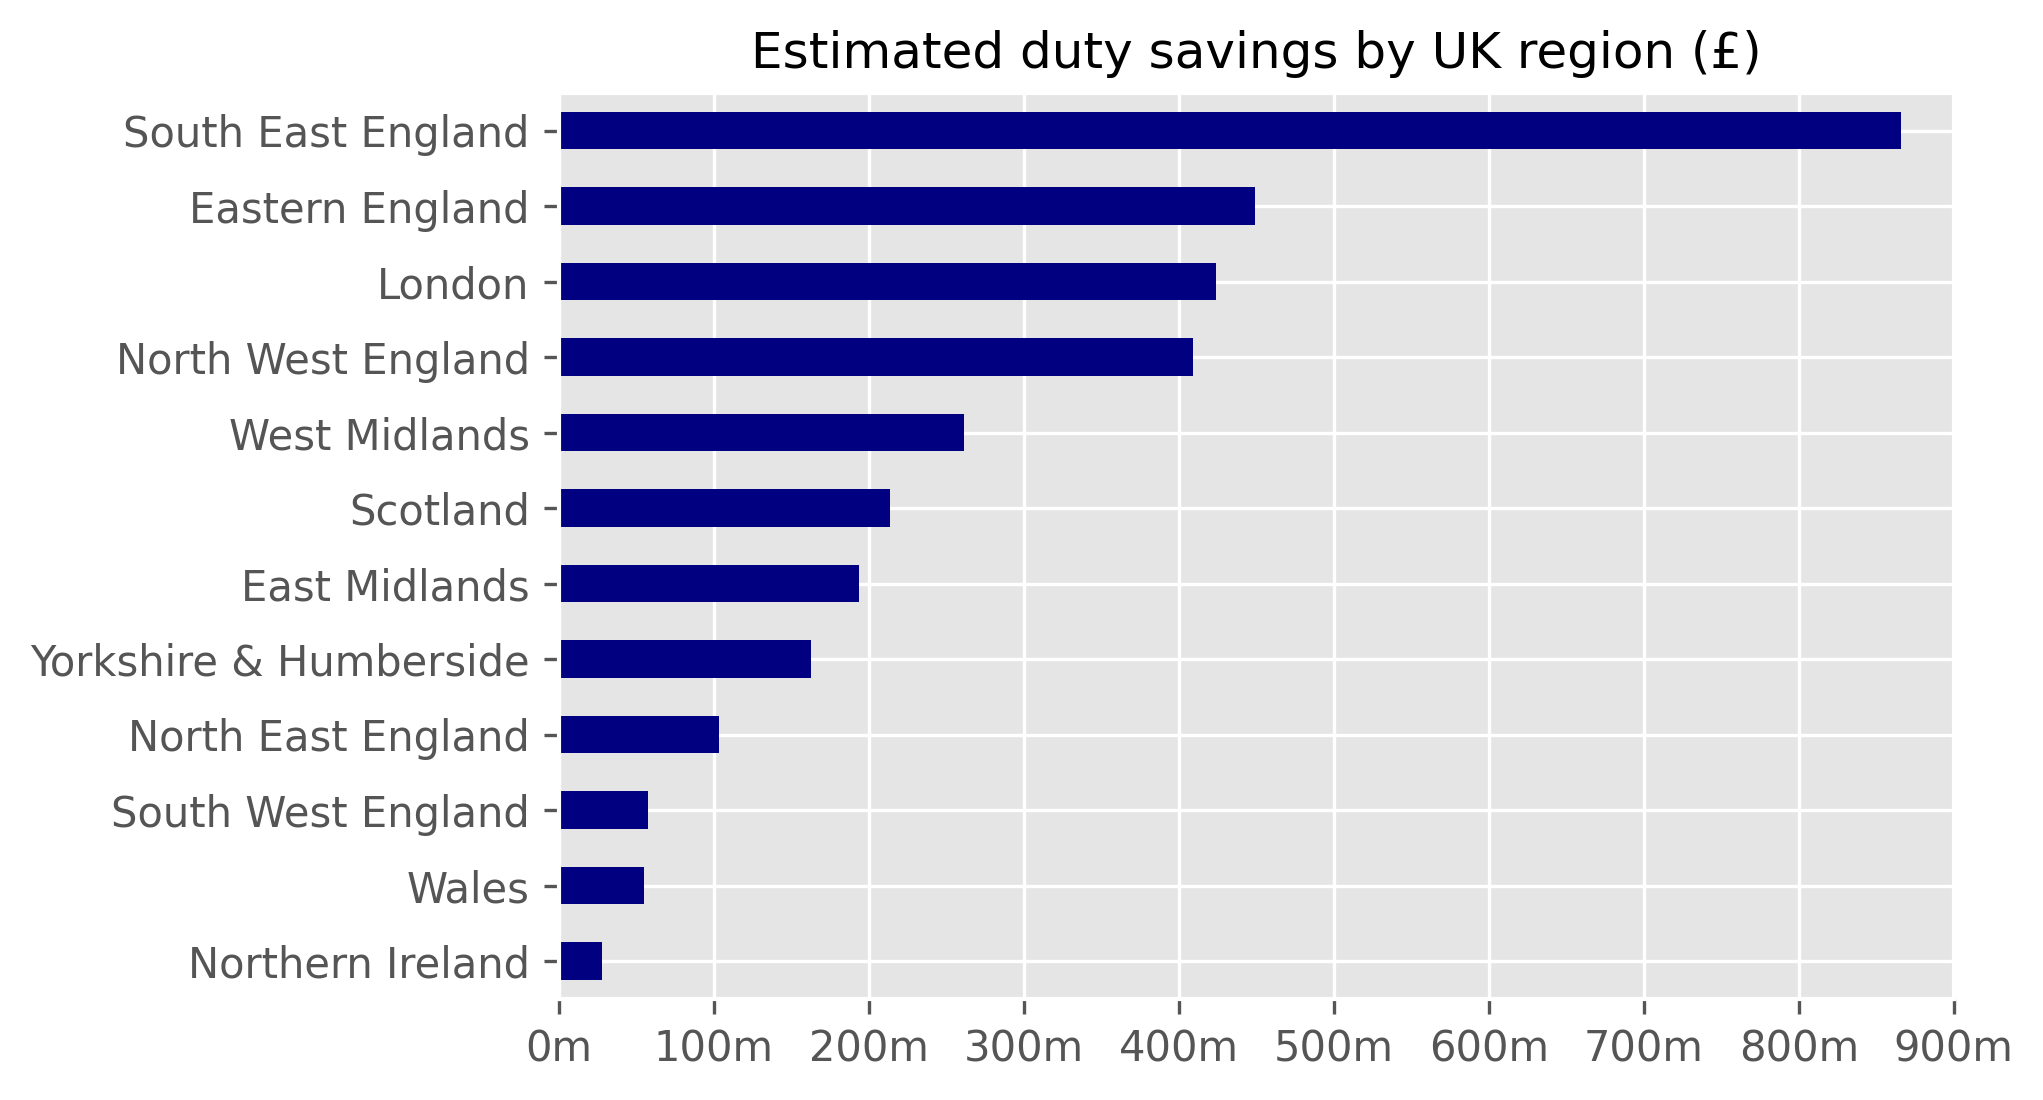 Figure 8: Bar chart of estimated duty savings by UK region which shows that businesses in Southeast England make up most of the total duty savings.